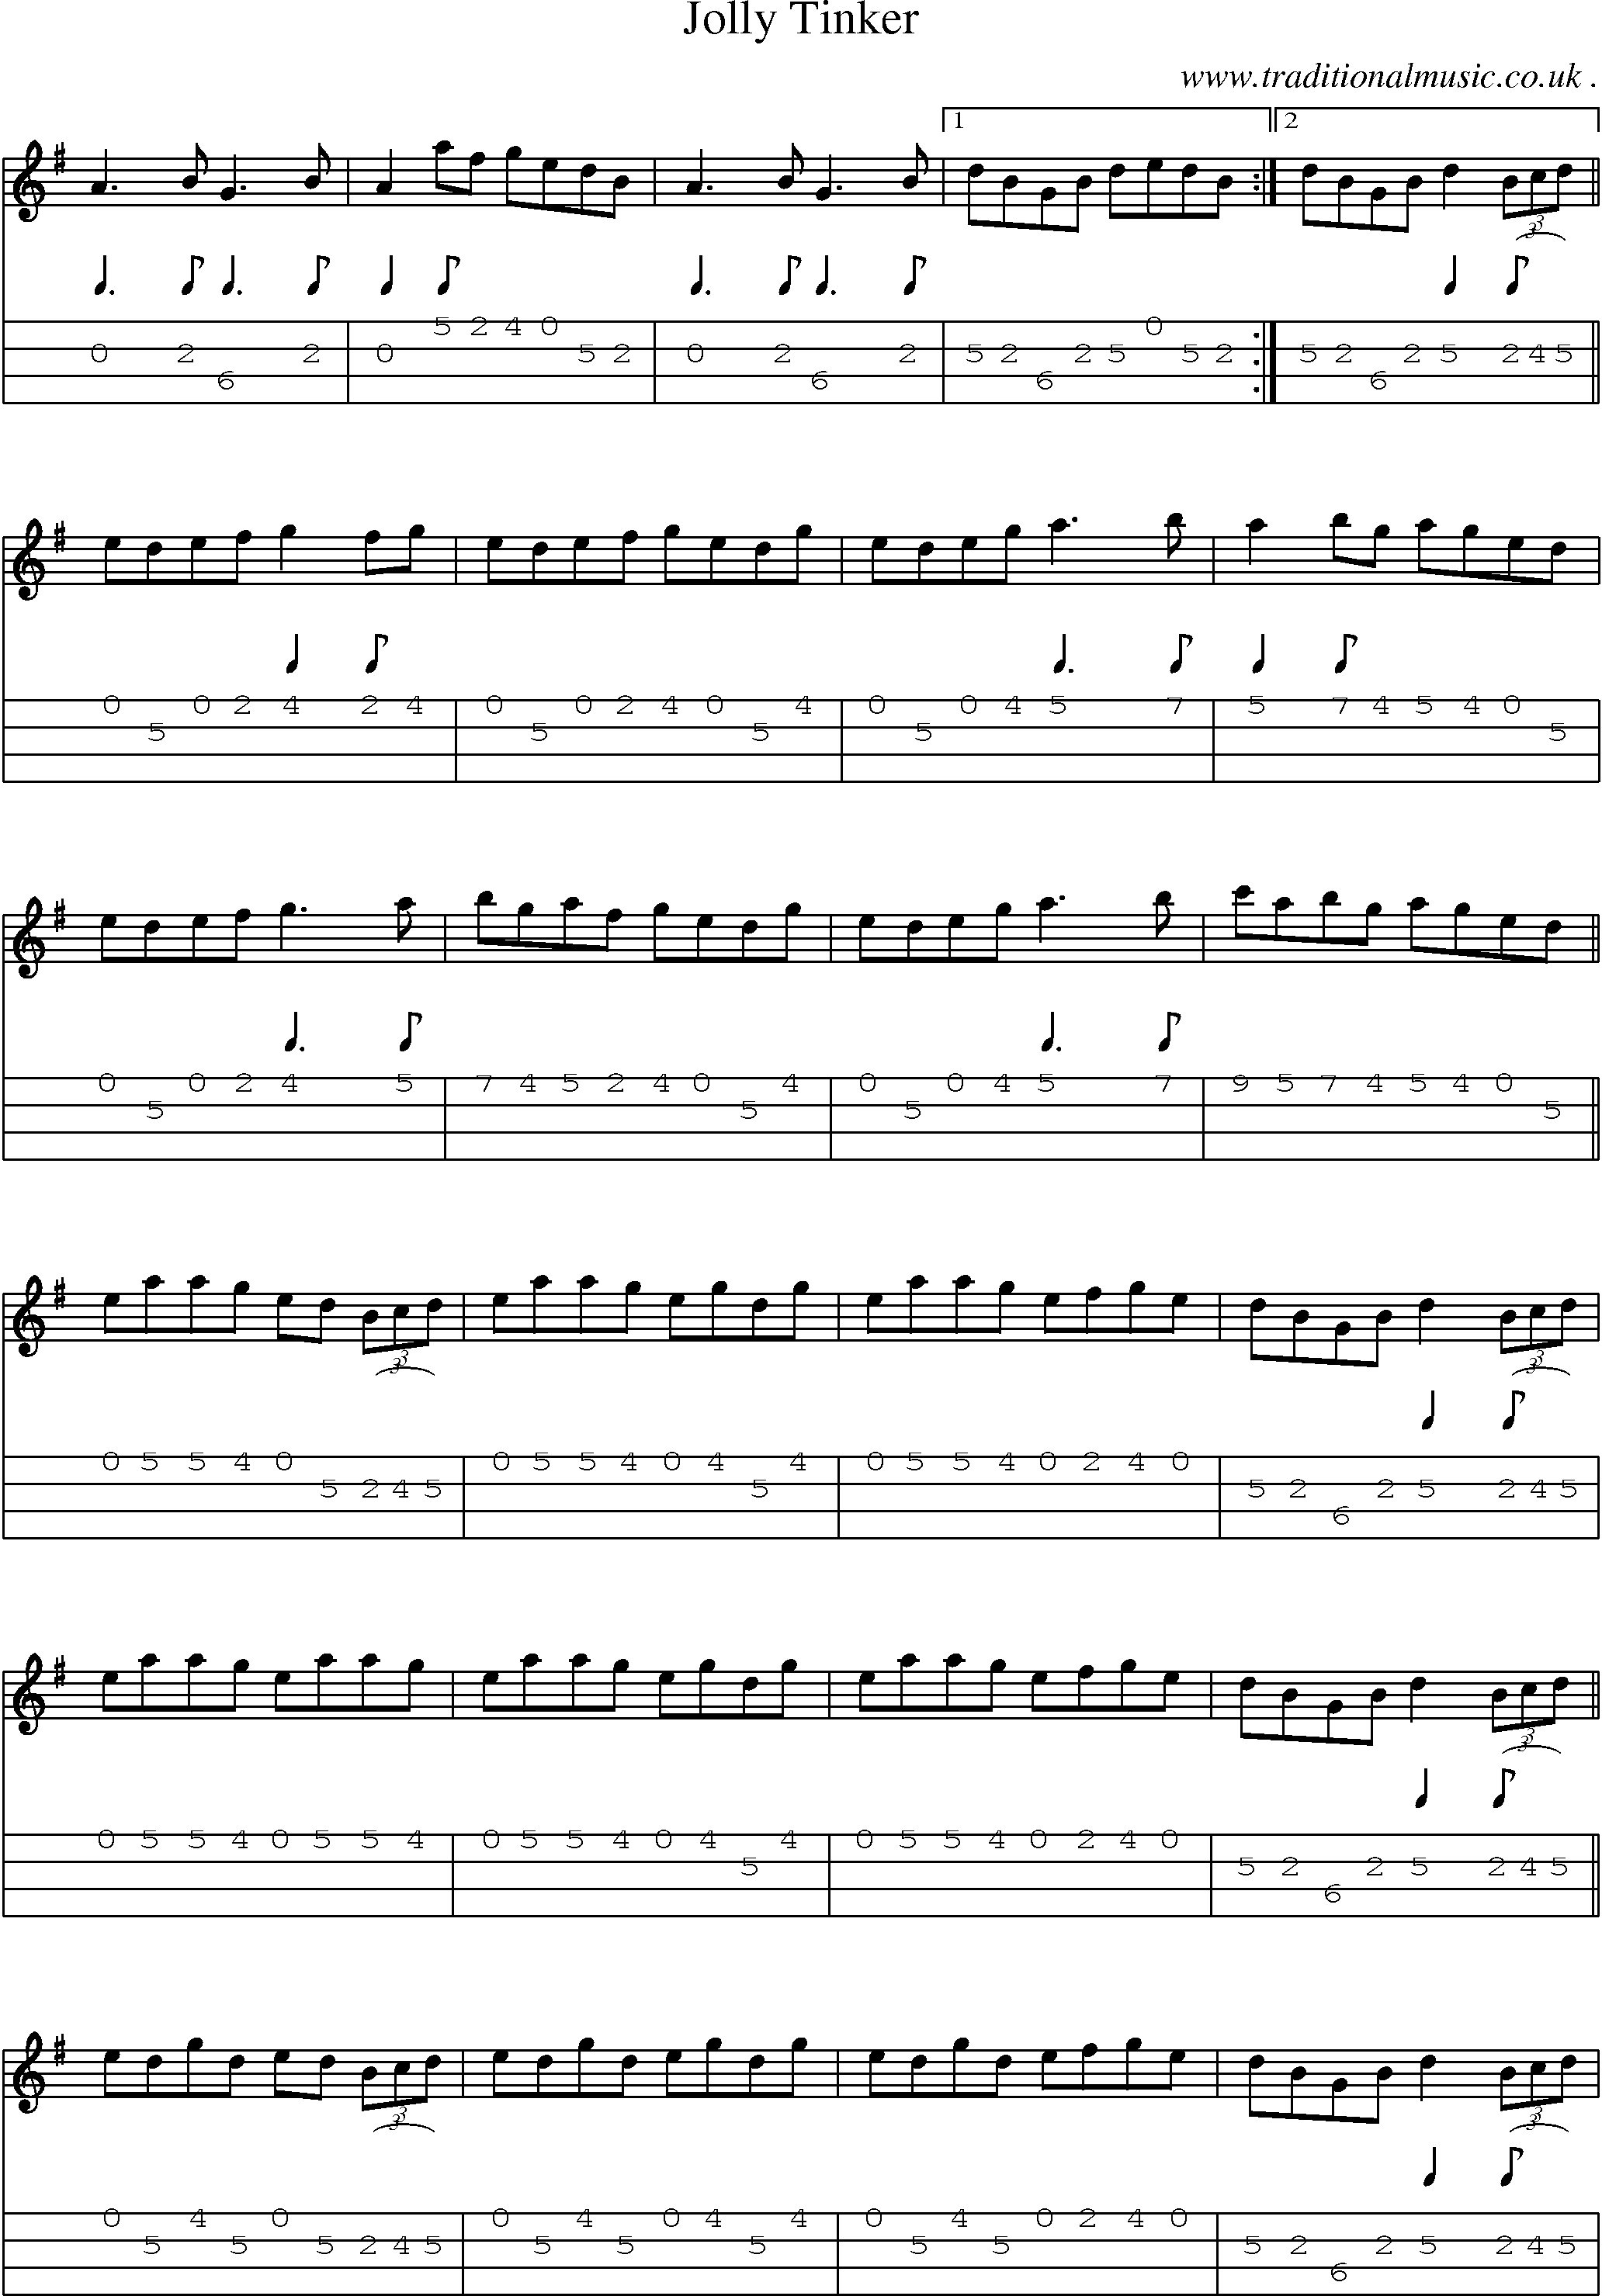 Sheet-Music and Mandolin Tabs for Jolly Tinker